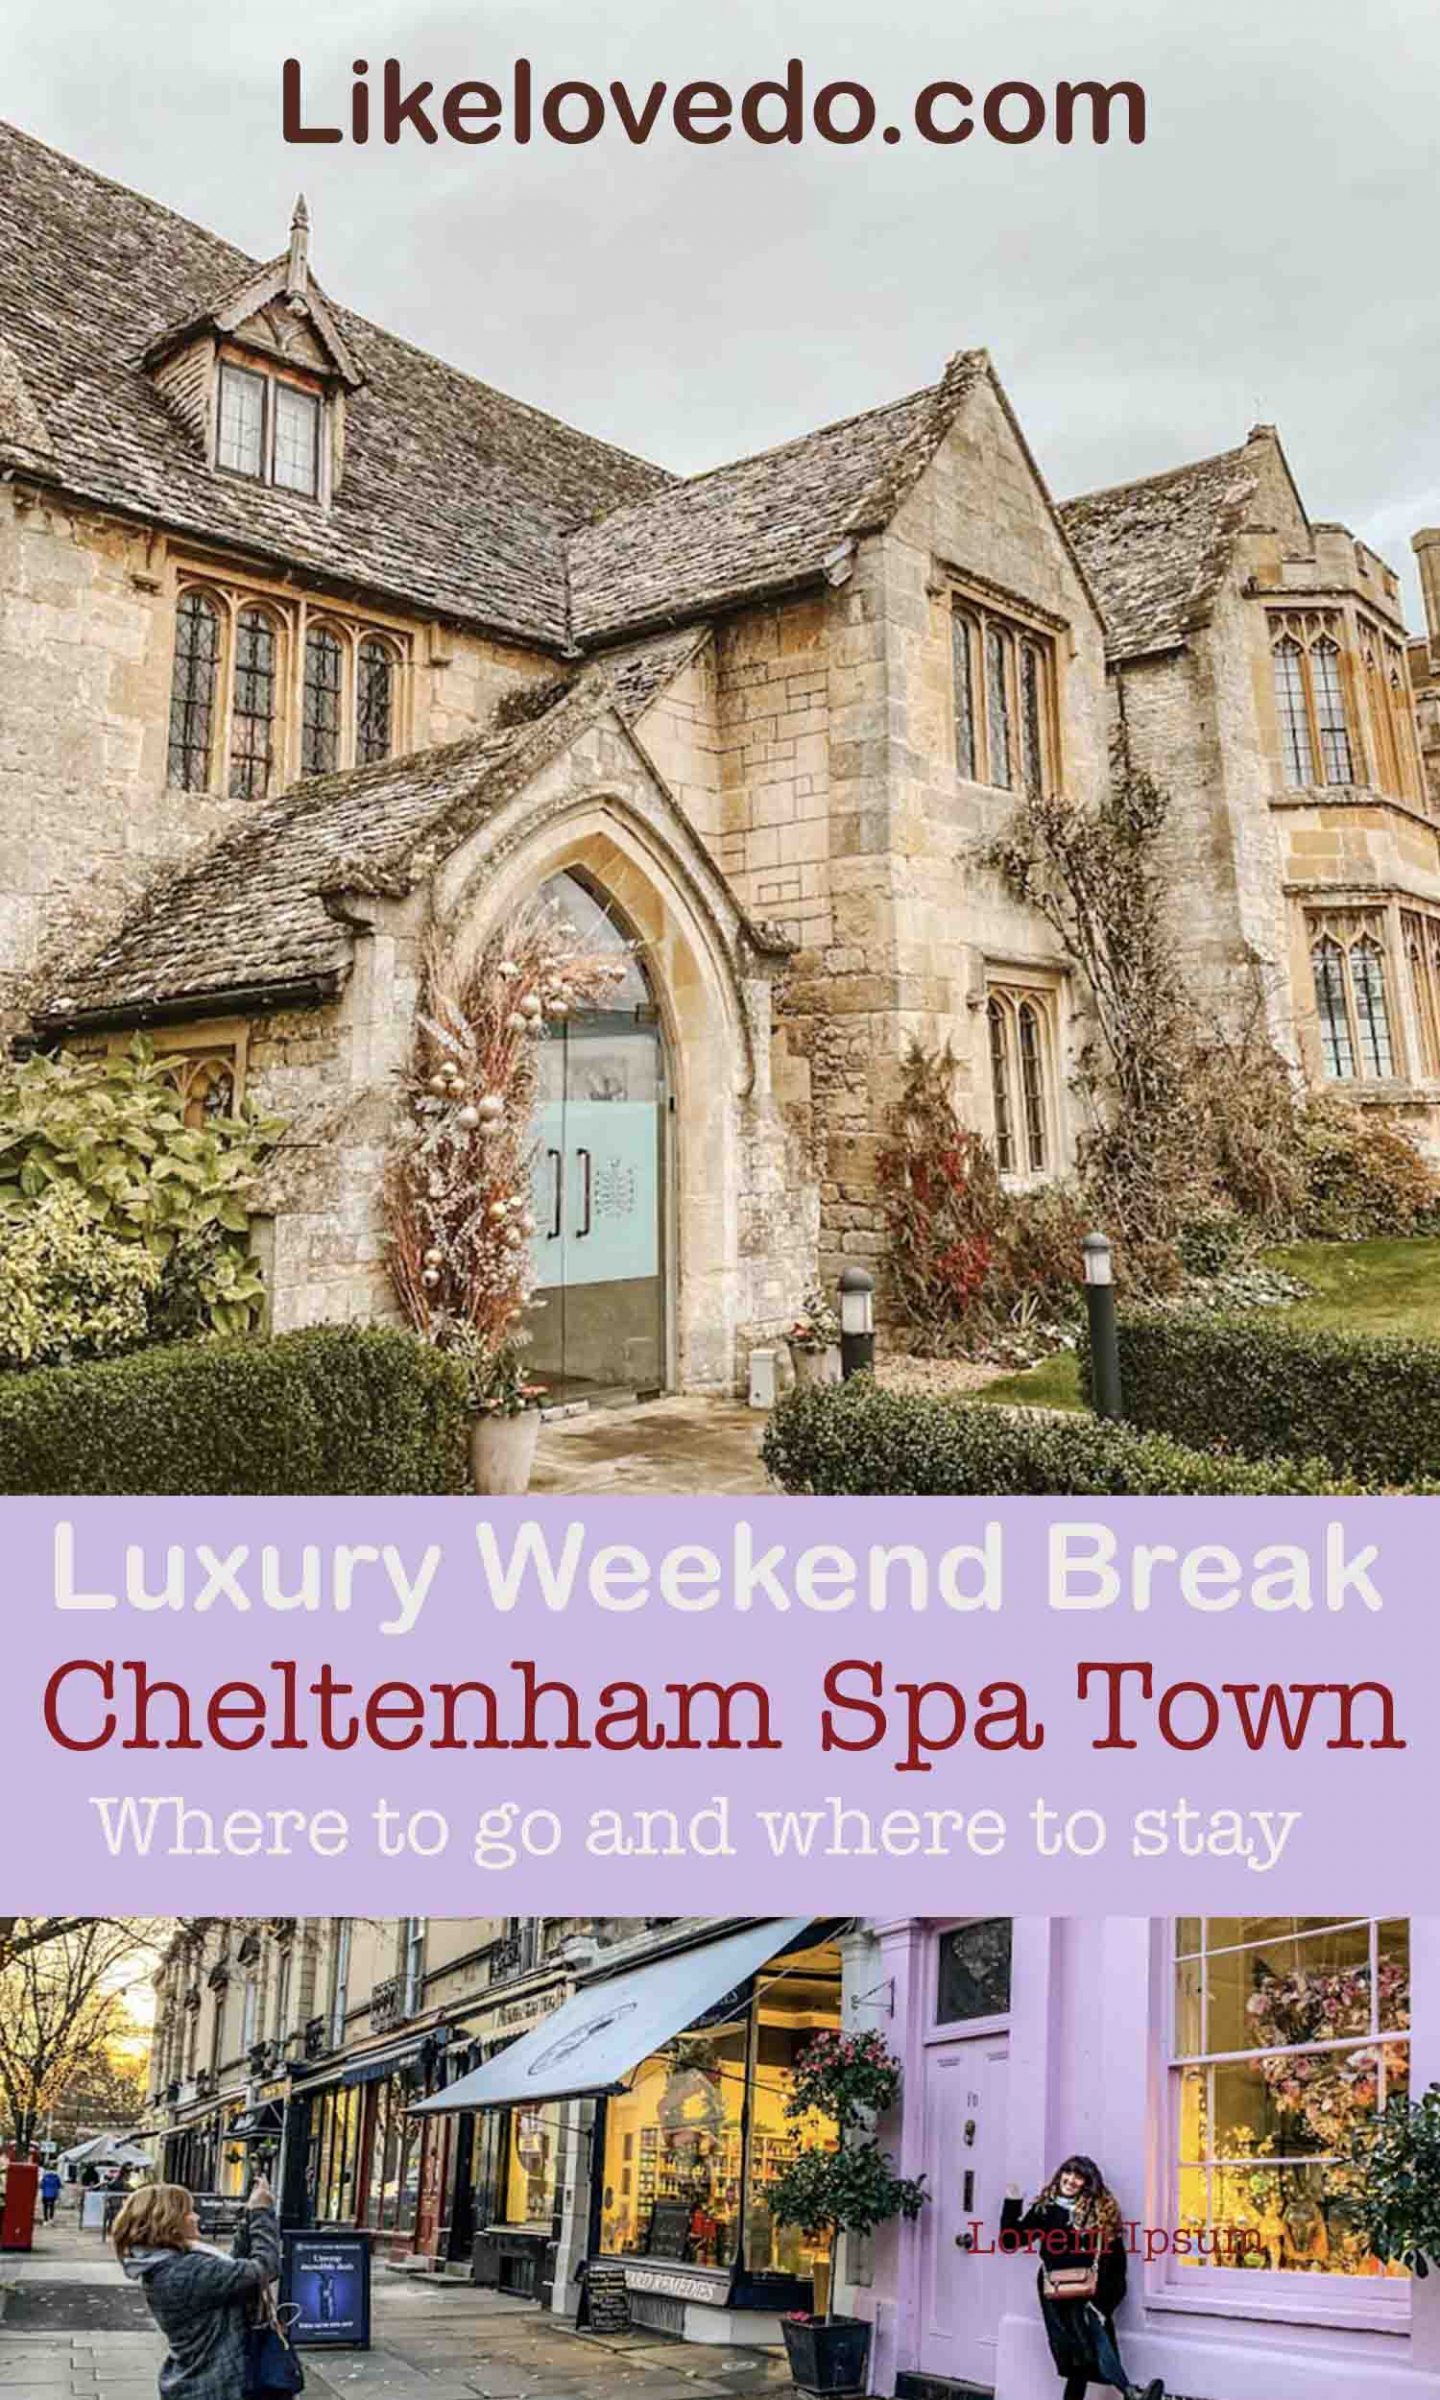 Where to go and stay on a luxury weekend in Cheltenham Pin image